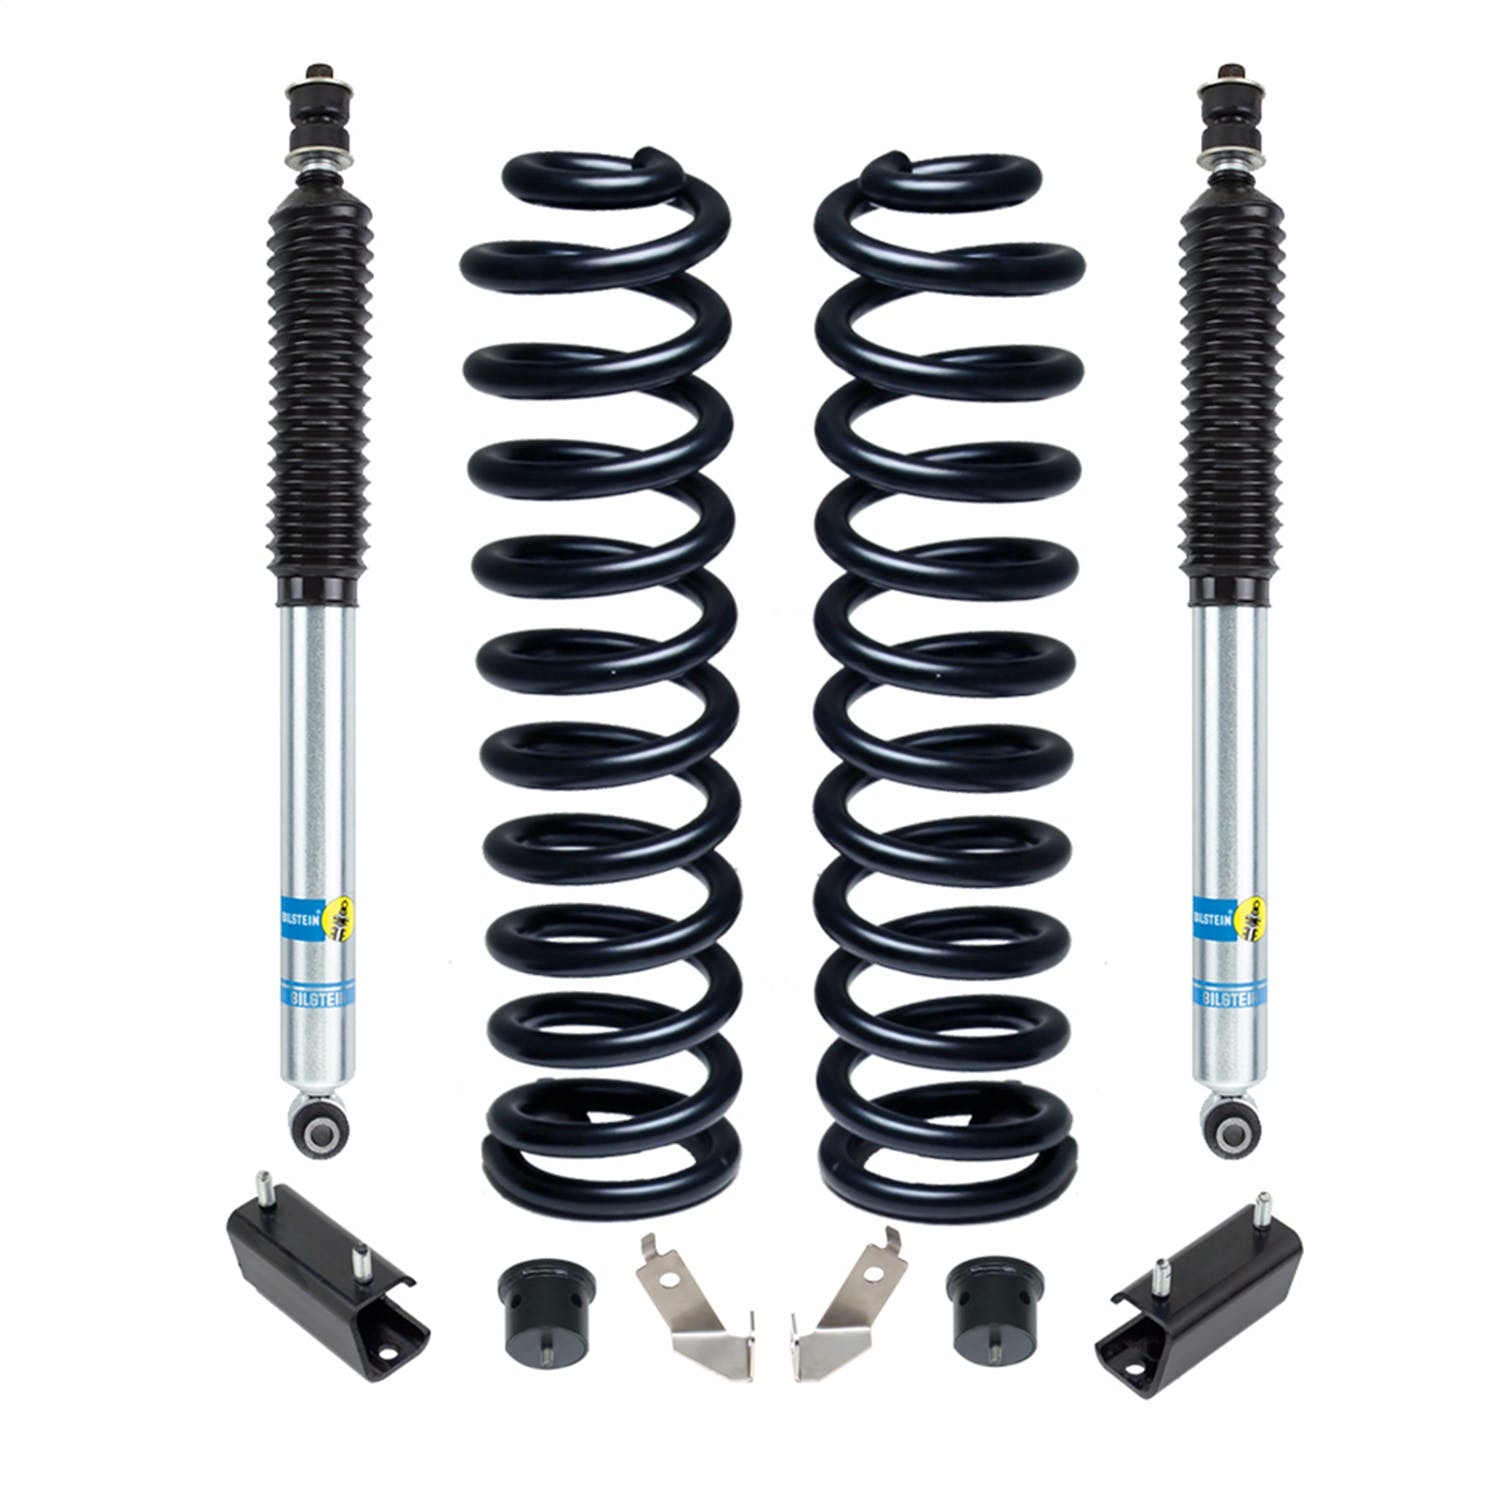 ReadyLIFT 46-2727 2.5" Coil Spring Front Lift Kit with Bilstein Shocks and Track Bar Bracket